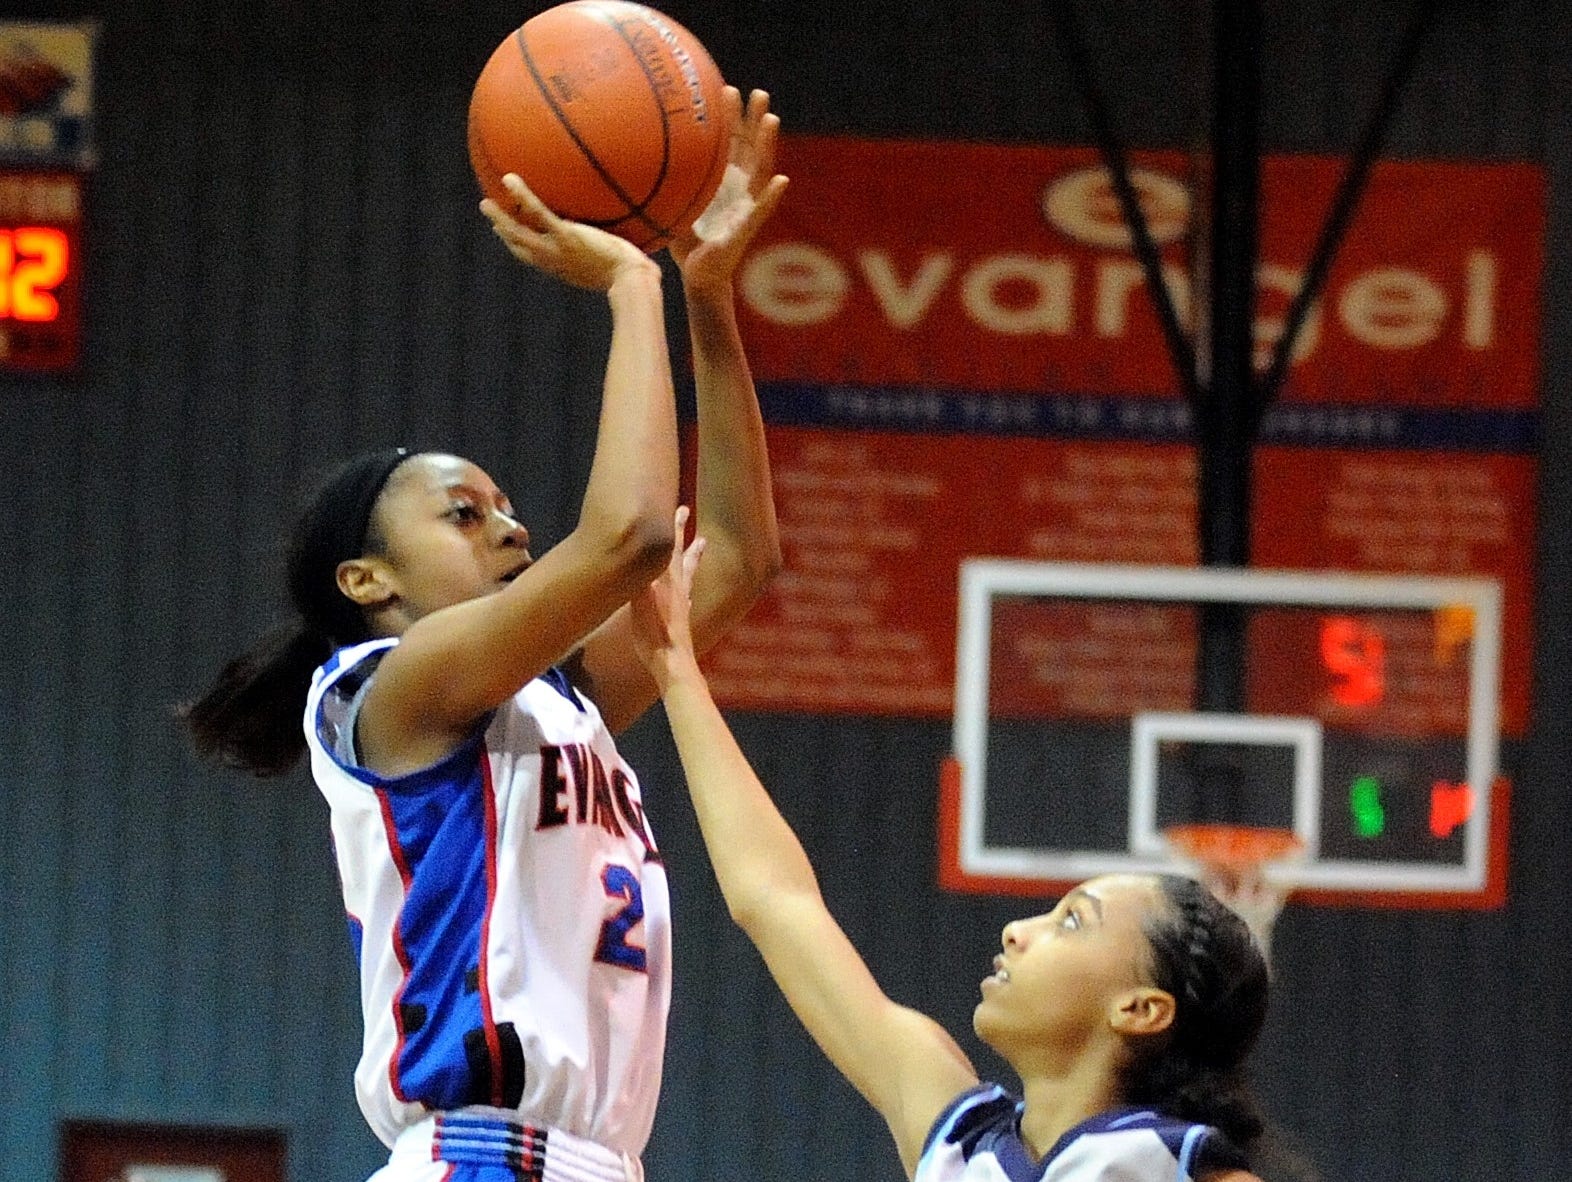 Evangel's Tiara Young puts up two of her 32 points against Airline Tuesday night.